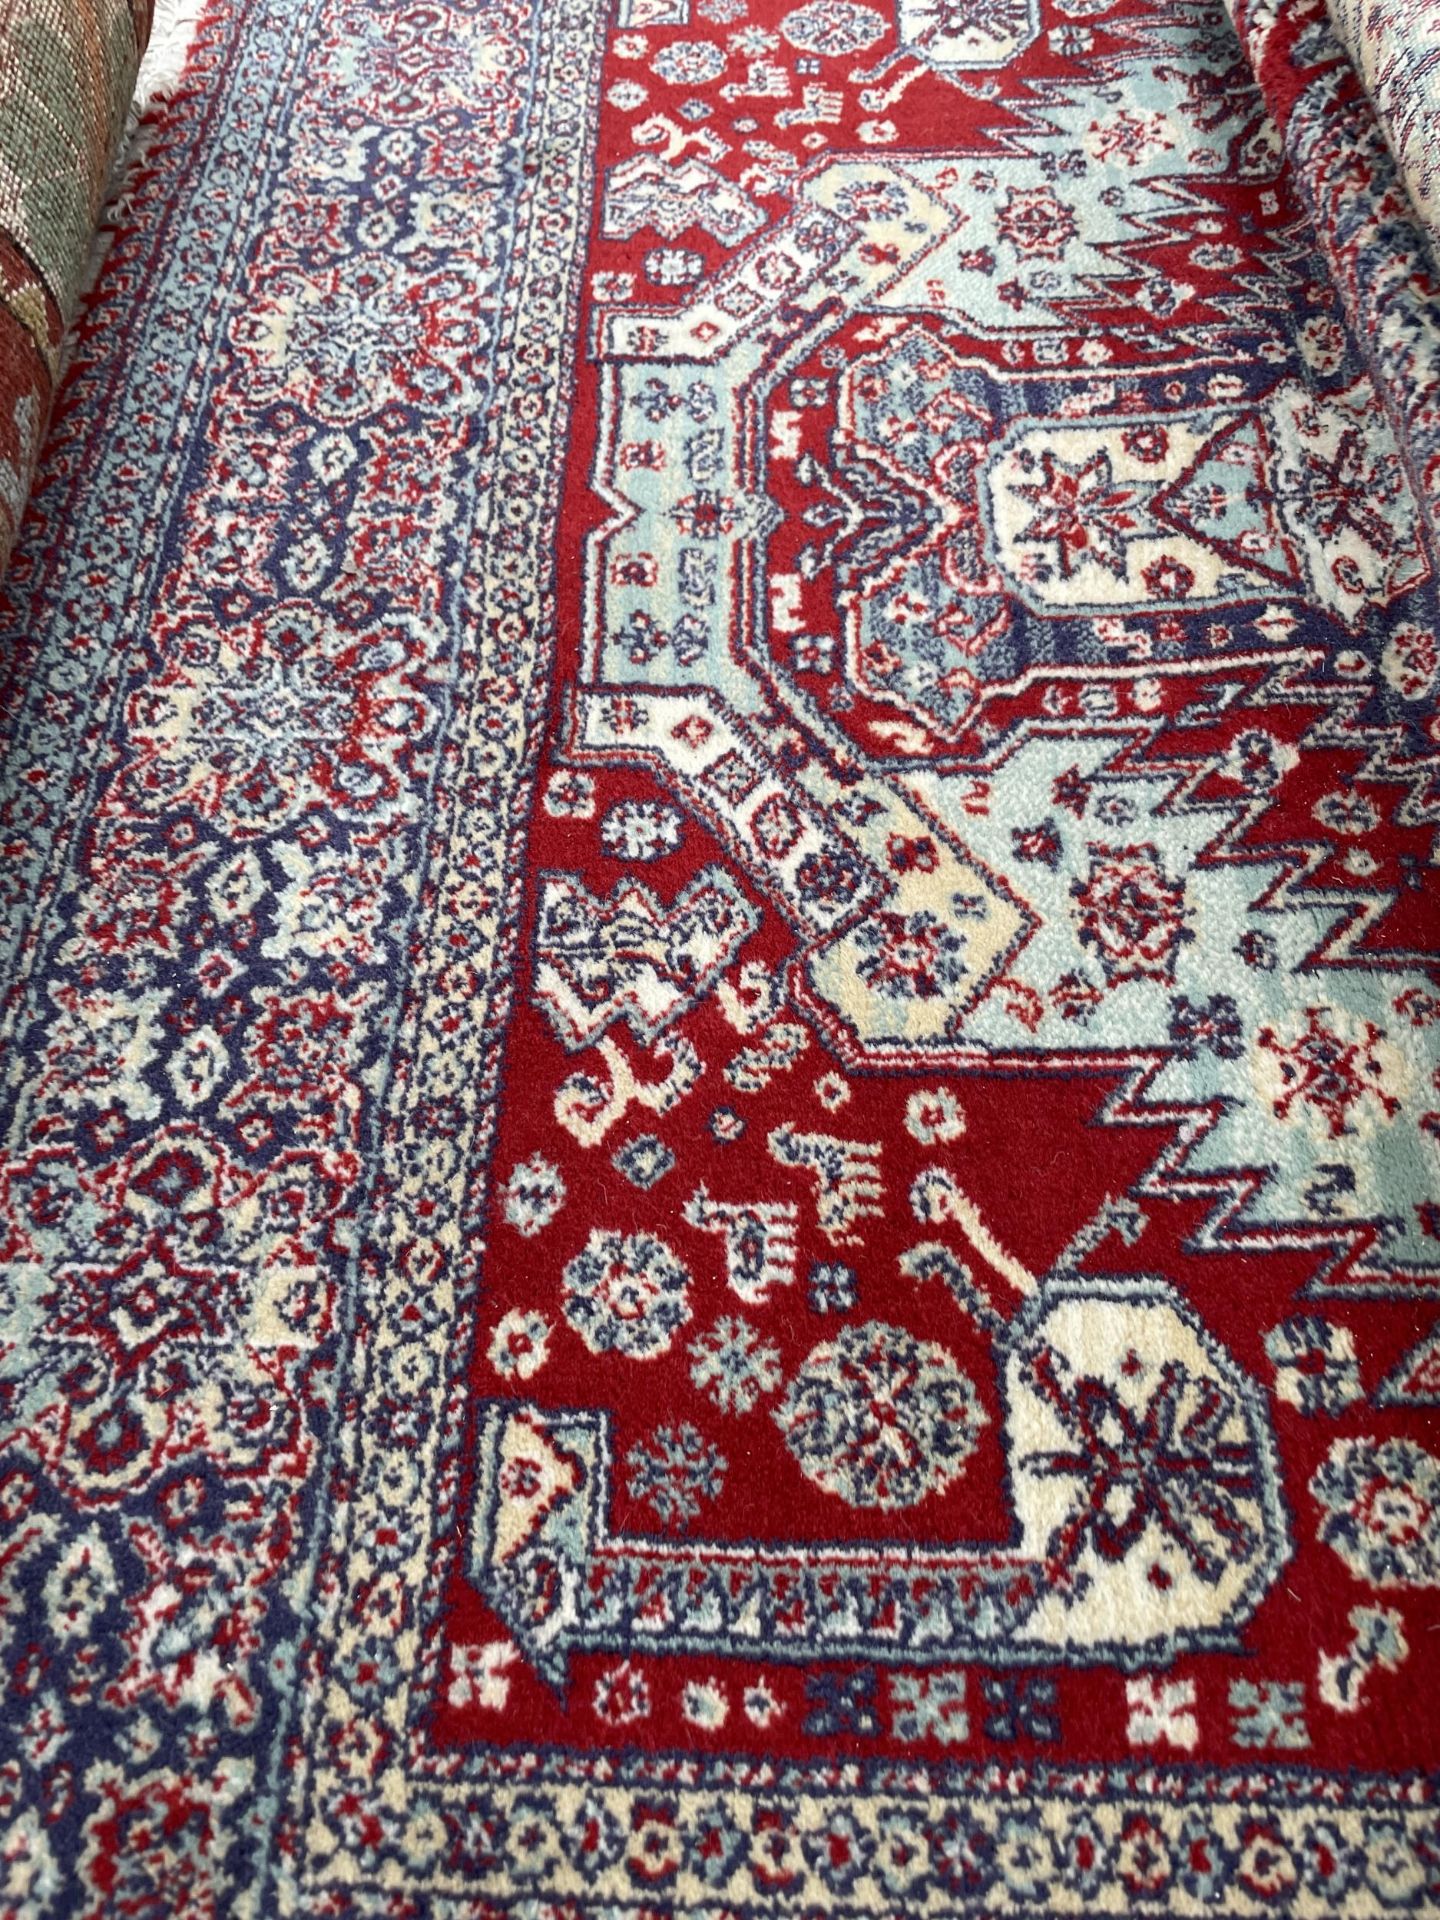 A RED PATTERNED FRINGED RUG - Image 2 of 2